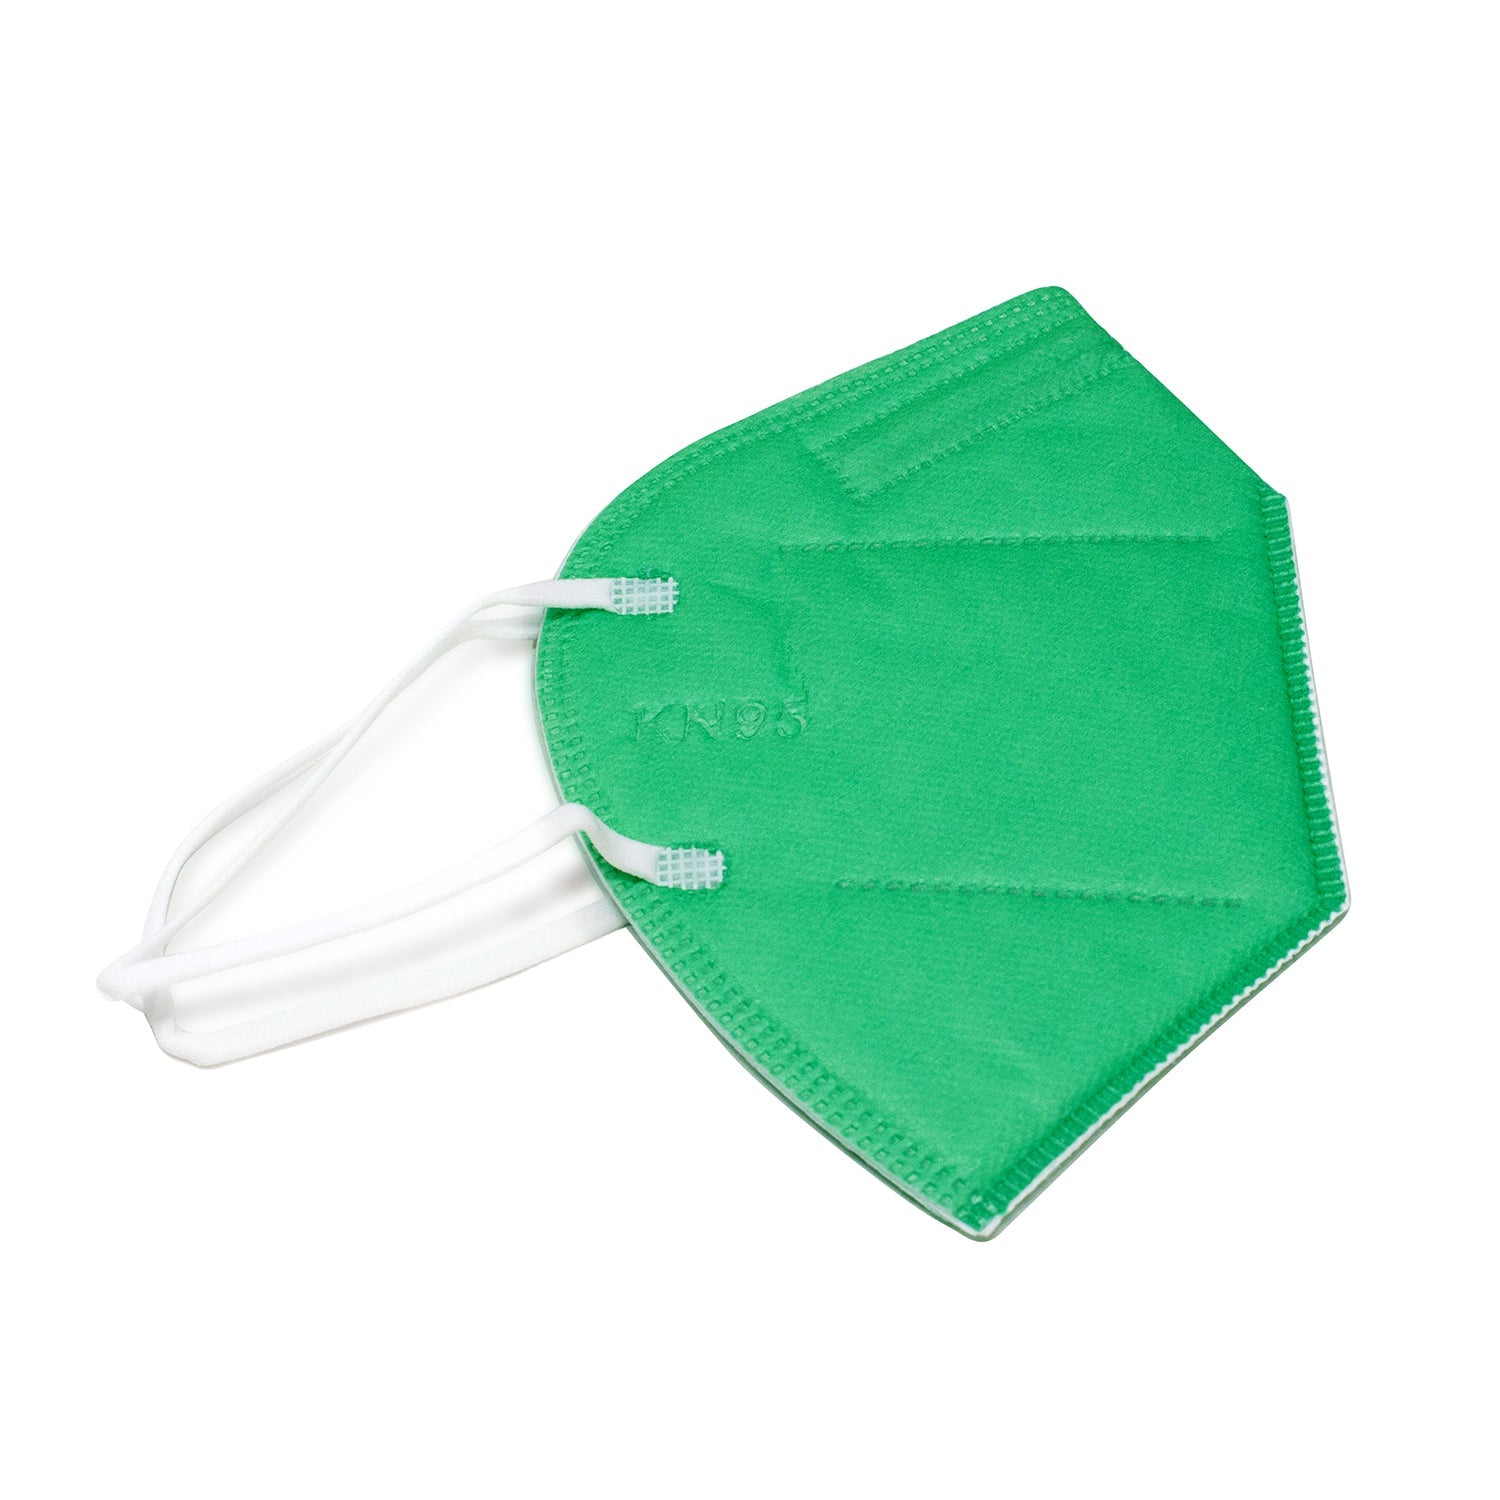 Safe KN95 mask with solid green design with white straps. Reusable mask, strong elastic straps. 